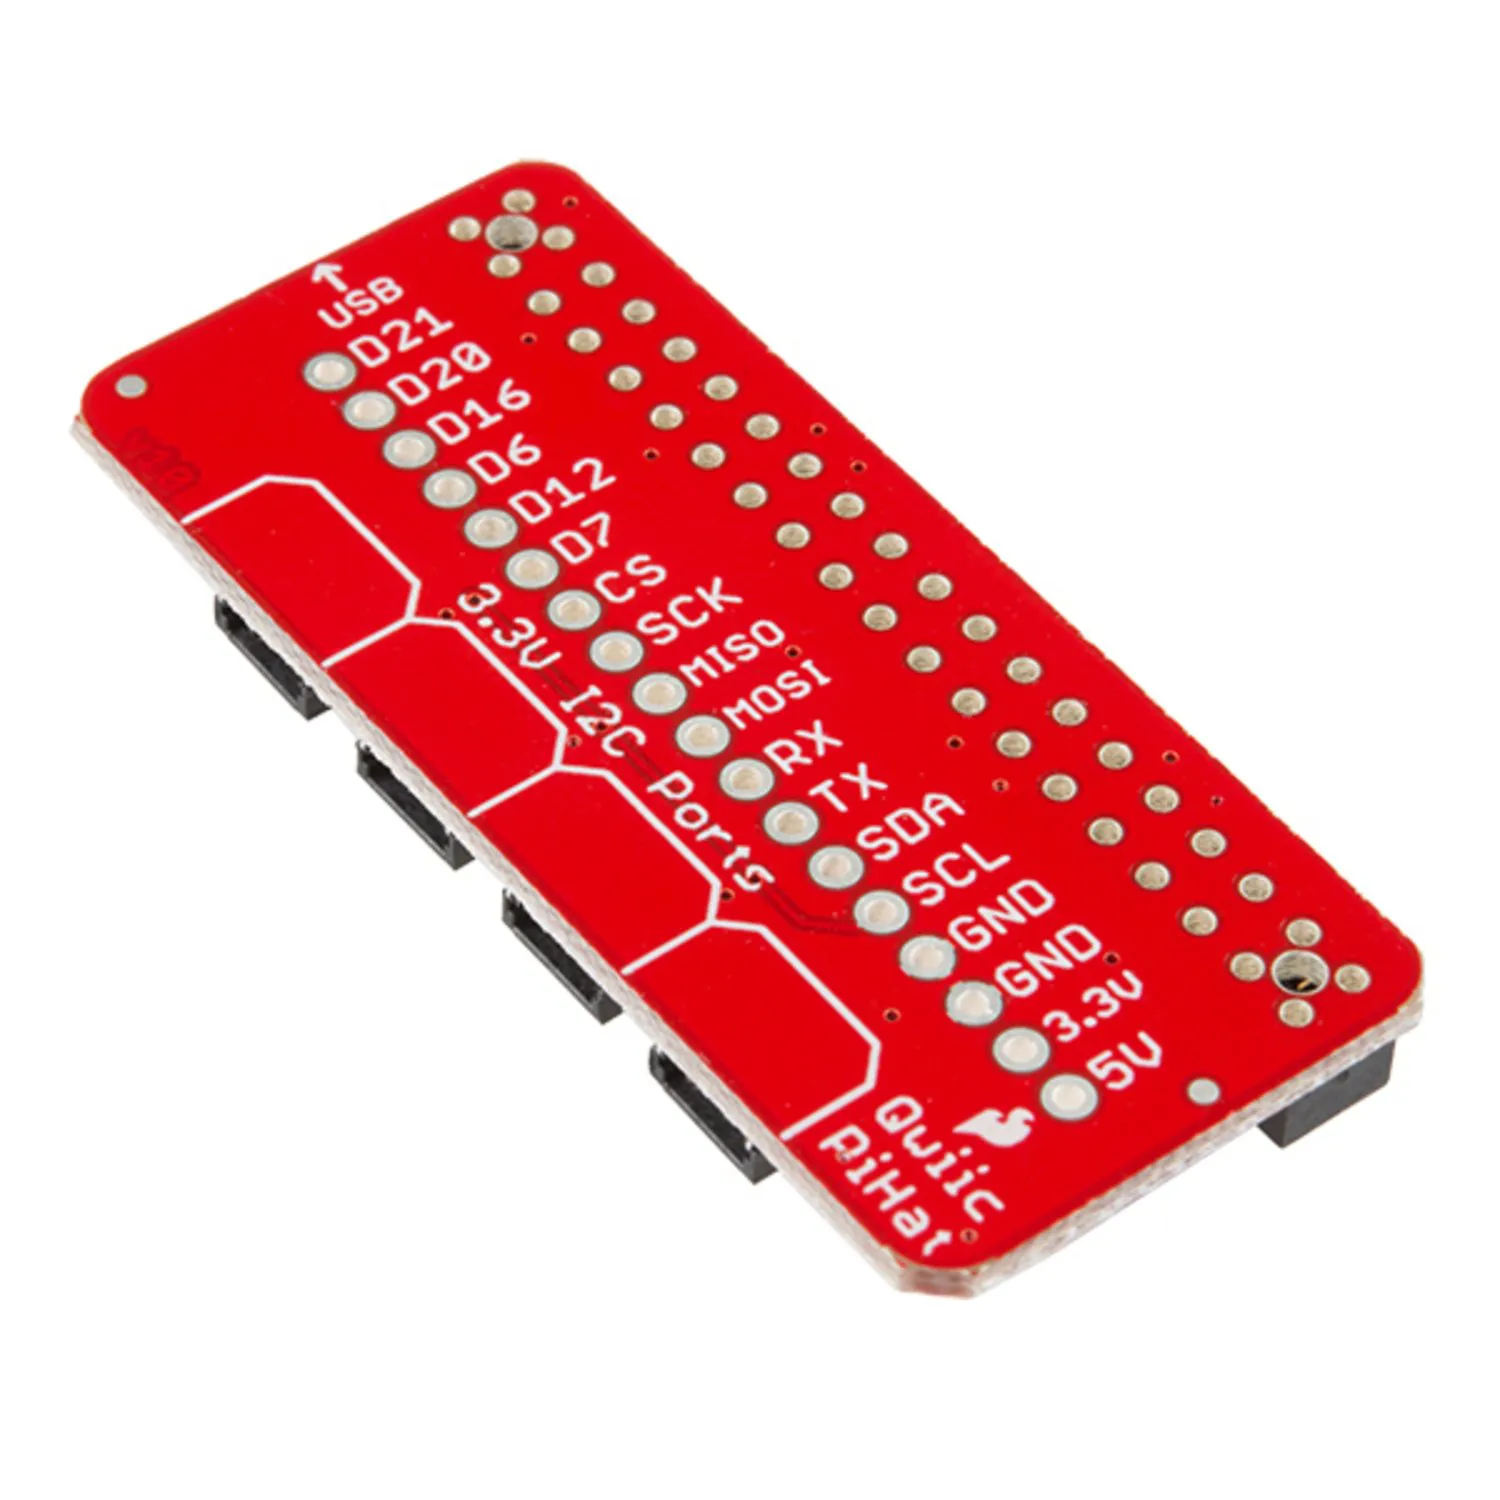 Photo of SparkFun Qwiic HAT for Raspberry Pi